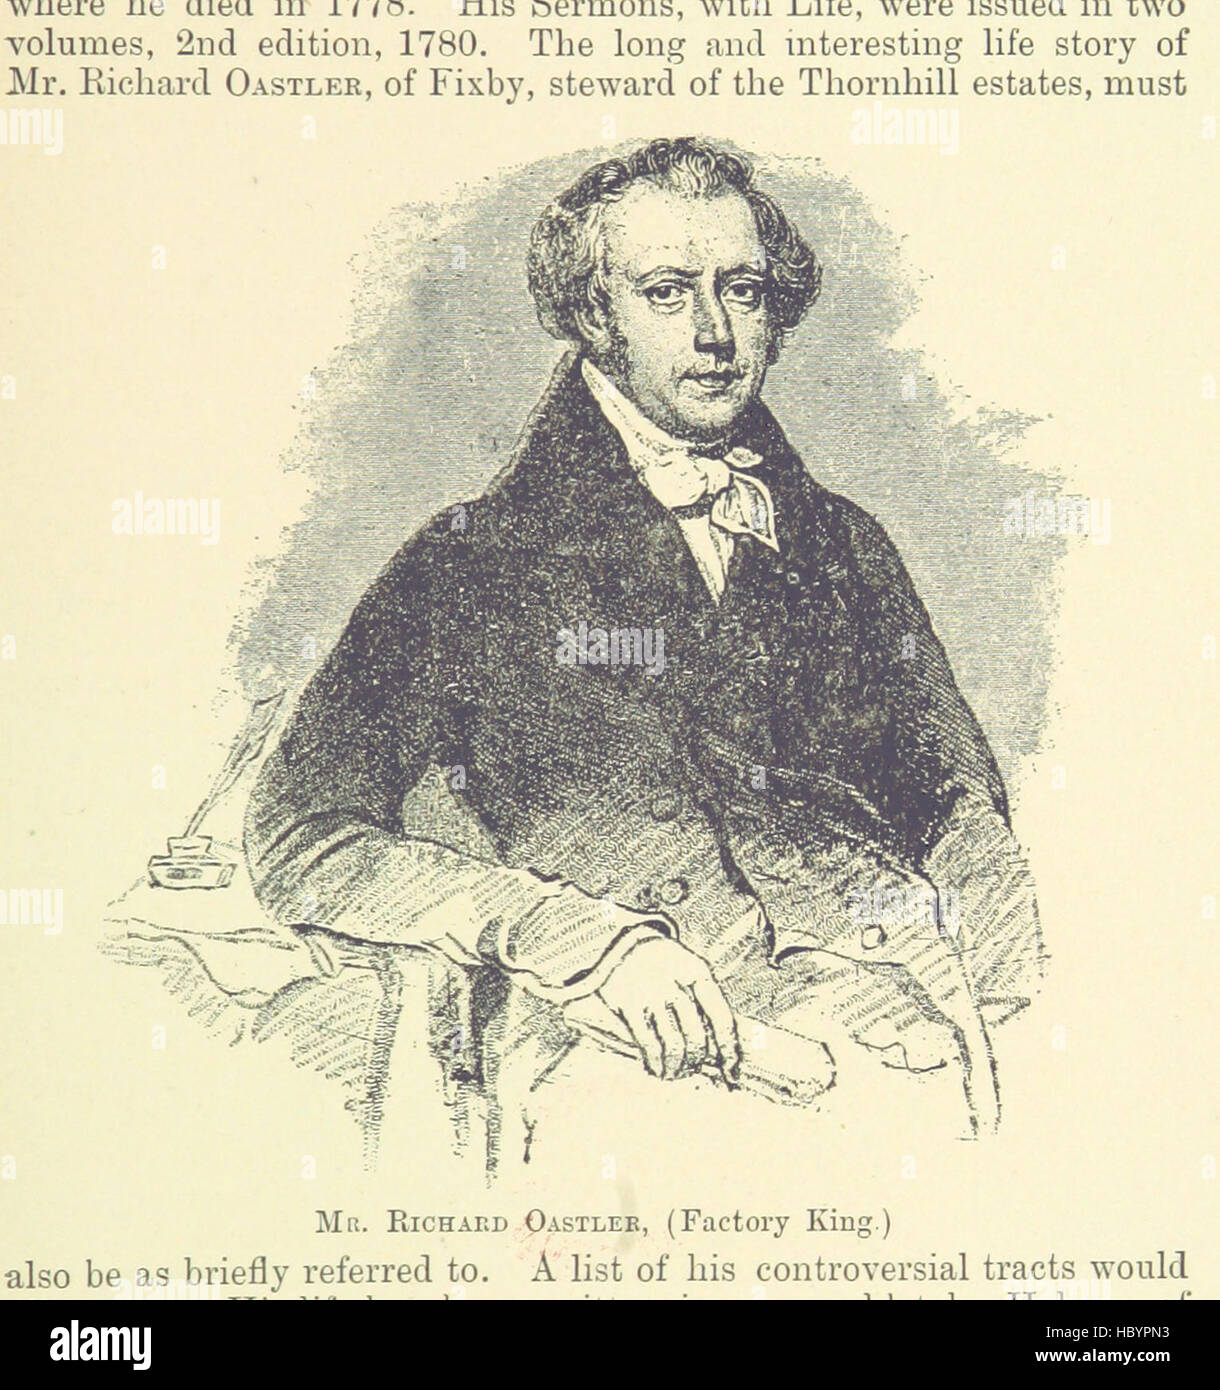 The History of Brighouse, Rastrick and Hipperholme; with manorial notes on Coley, Lightcliffe, Northowram, Shelf, Fixby, Clifton and Kirklees ... One hundred and seventy illustrations. Incorporation memorial Image taken from page 337 of 'The History of Brighouse, Stock Photo